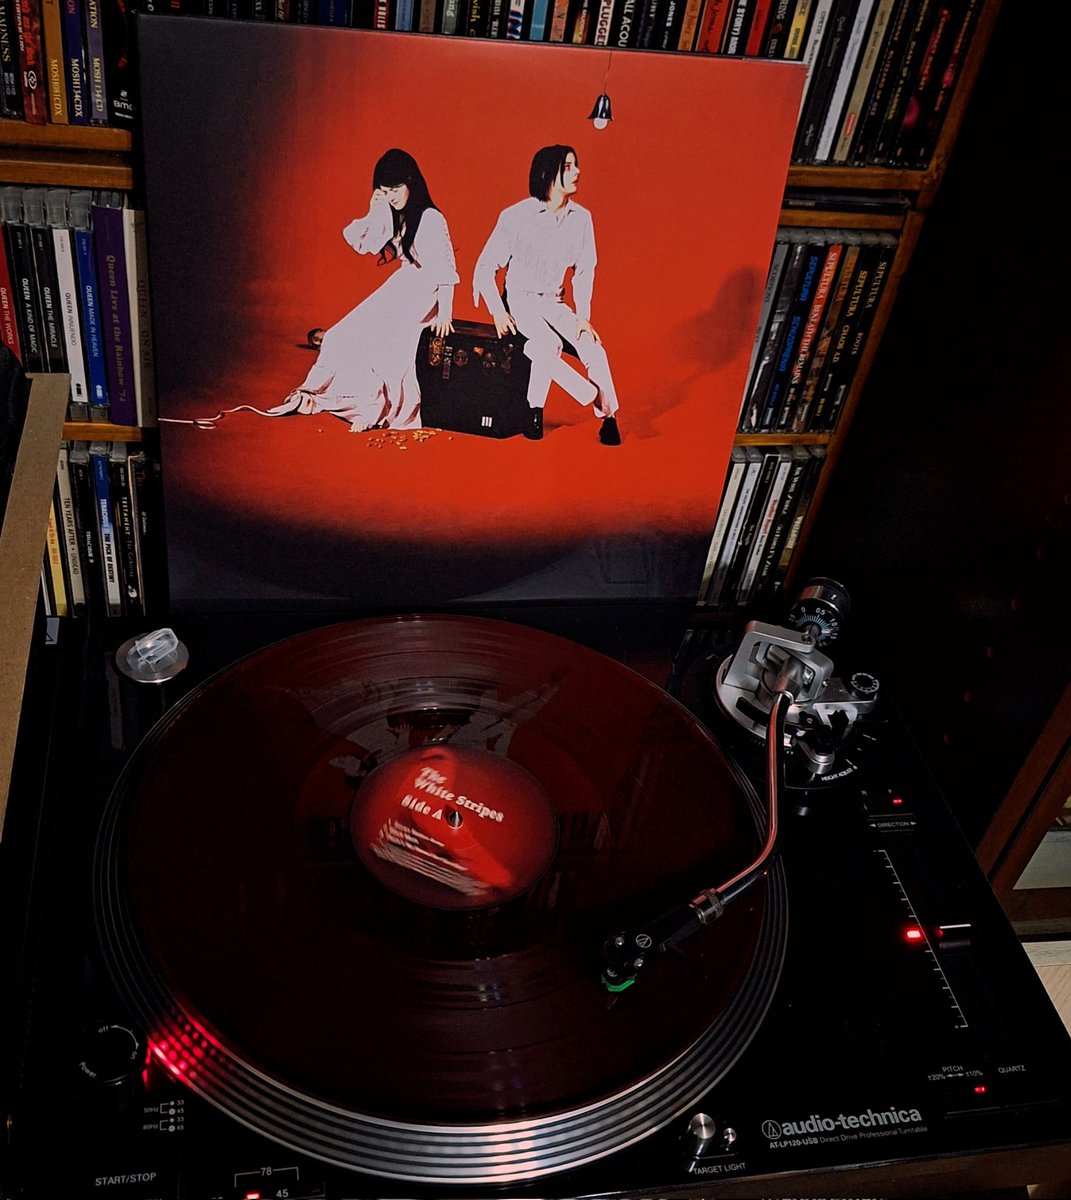 Seven nation army #nowspinning #WhiteStripes  #Elephant #Vinyl #20thanniversary #classicalbums #myvinylcollection